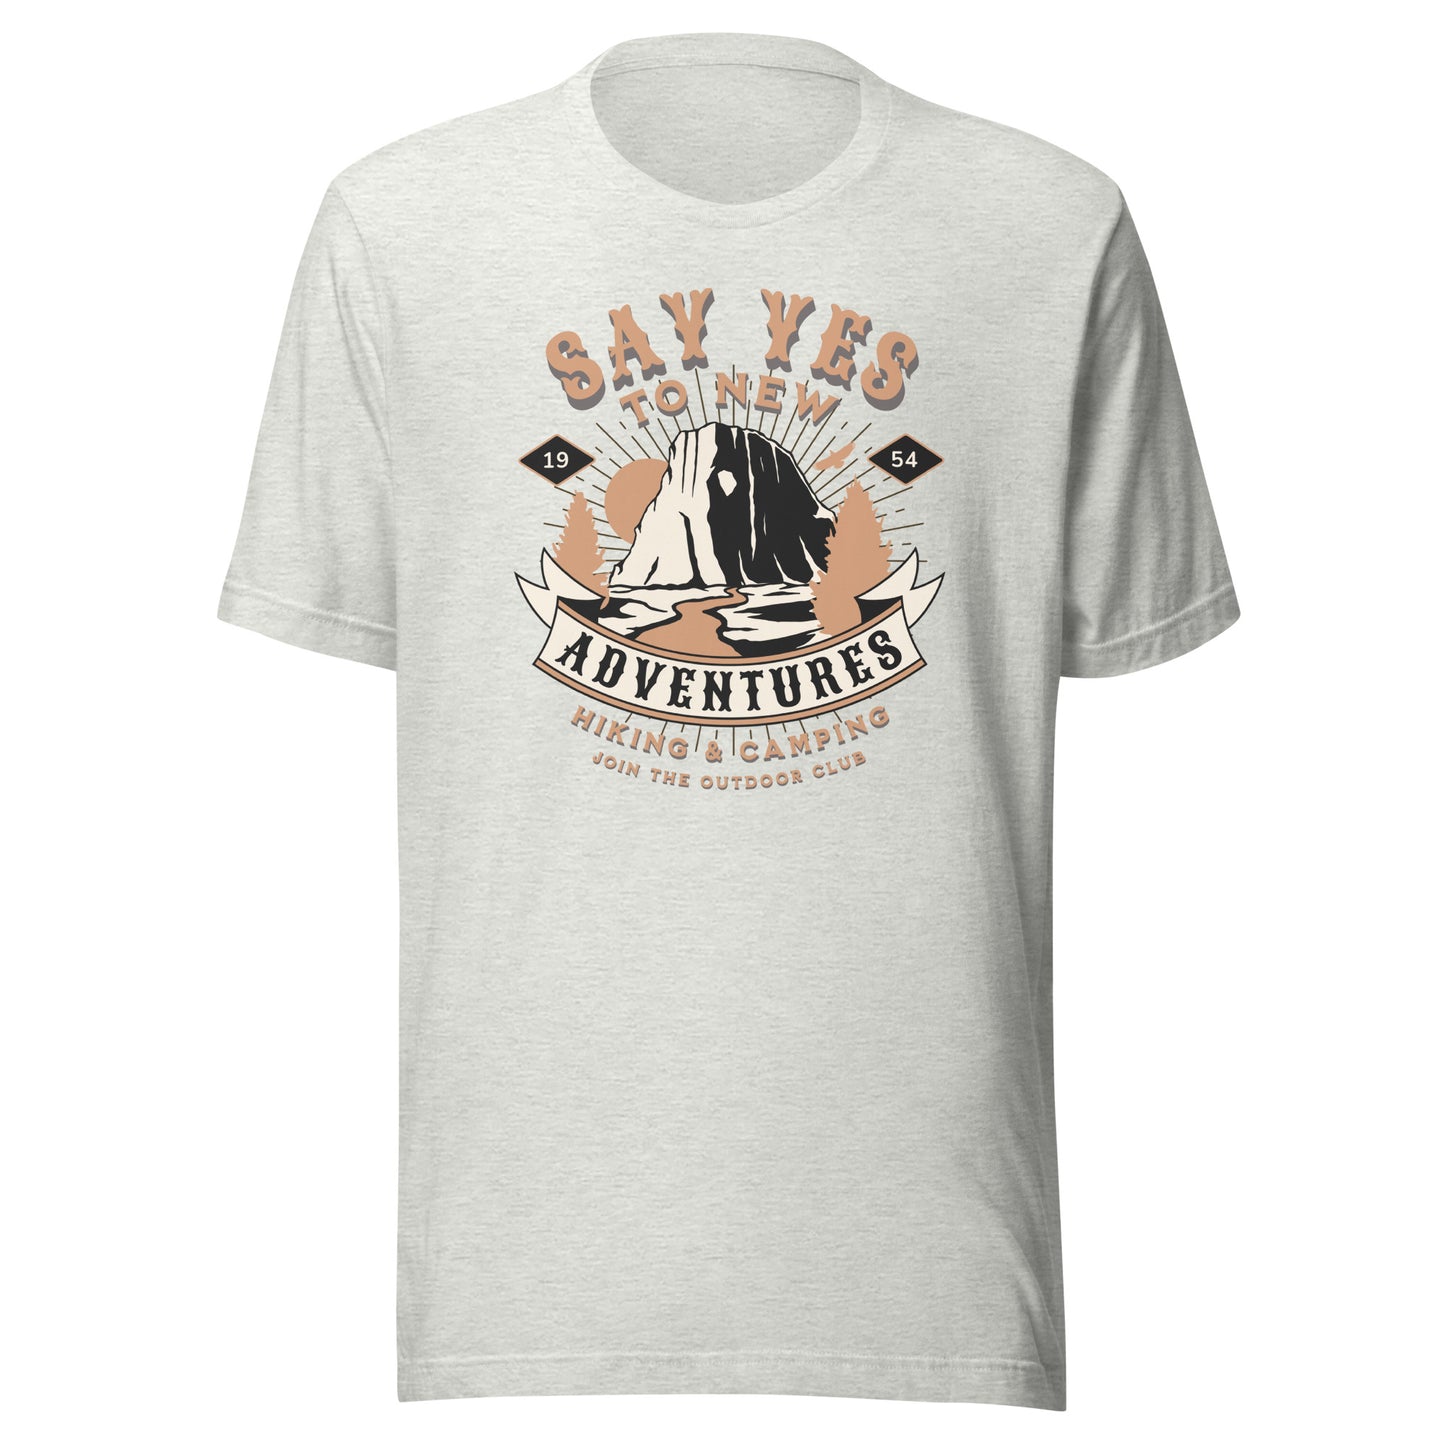 Say Yes to New Adventures Unisex T-shirt